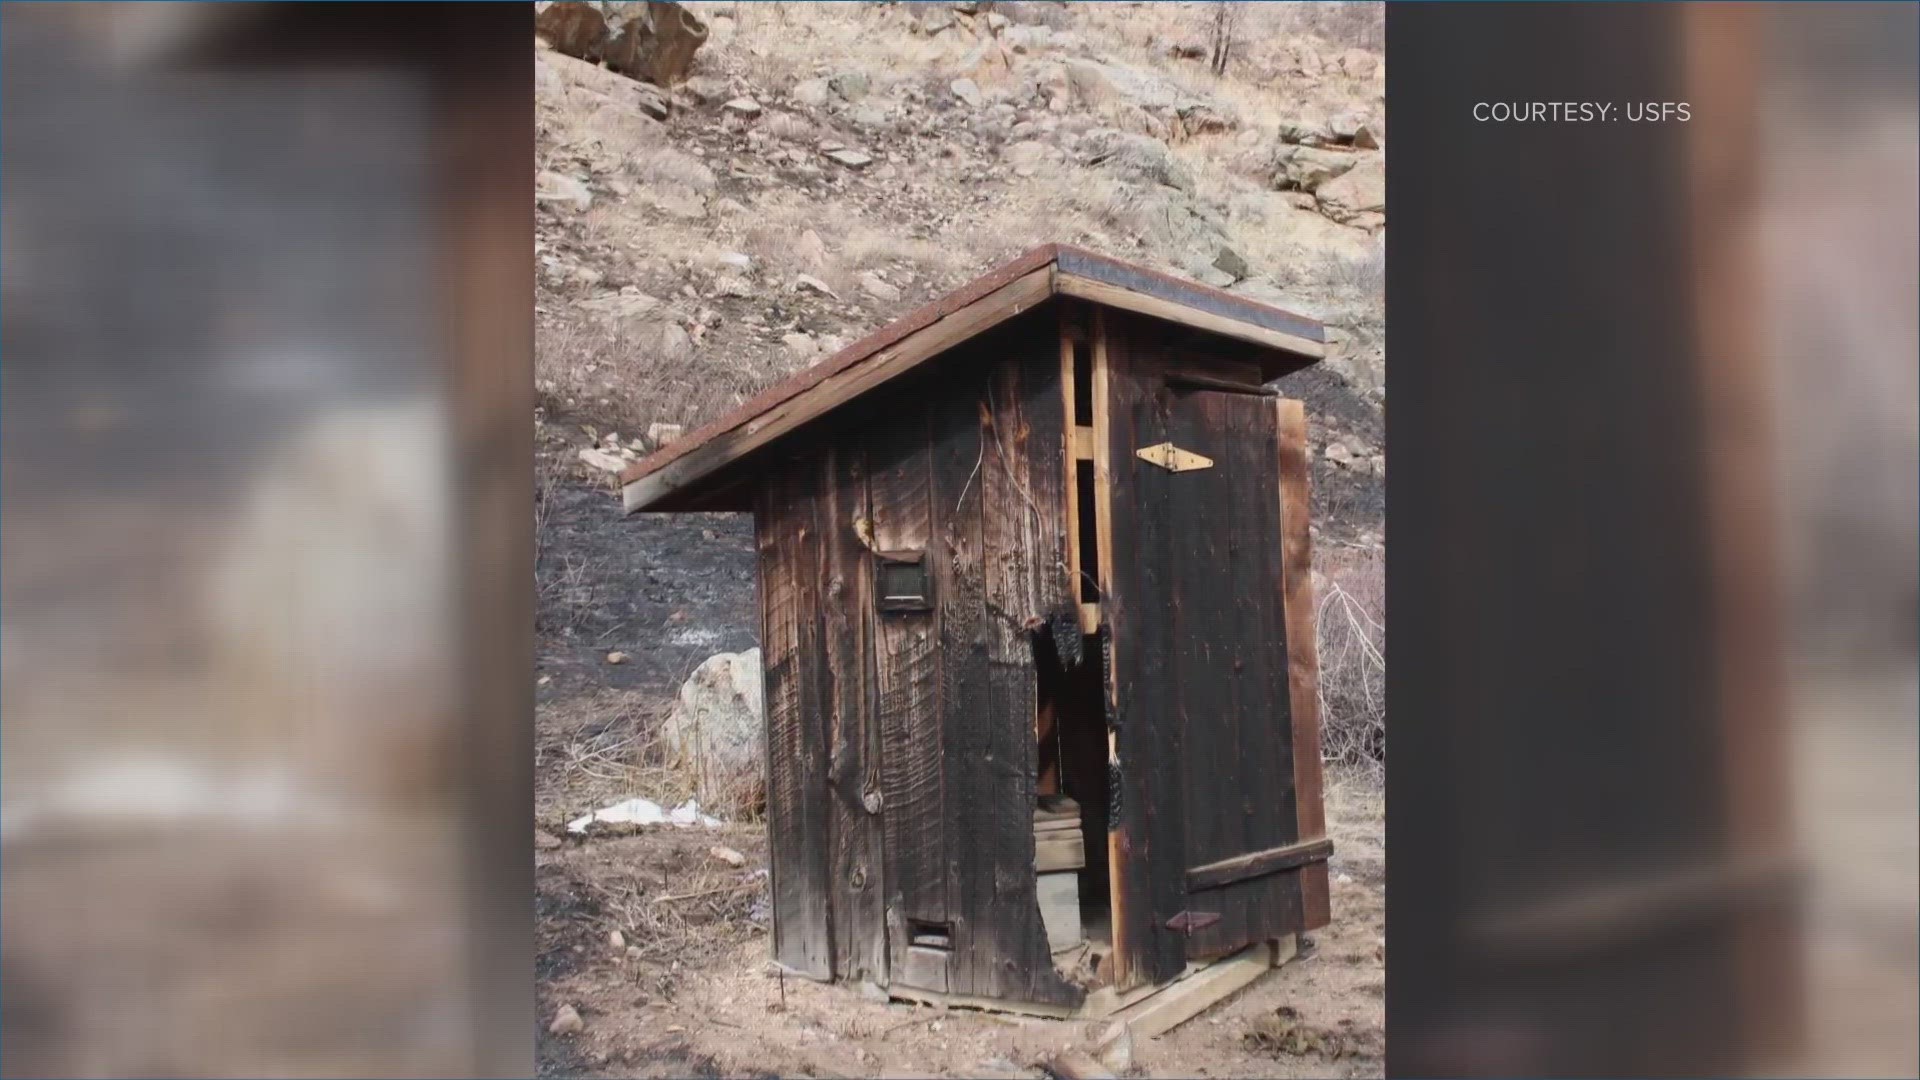 The historic outhouses were a part of the 1991 nomination for the National Register of Historic Places.